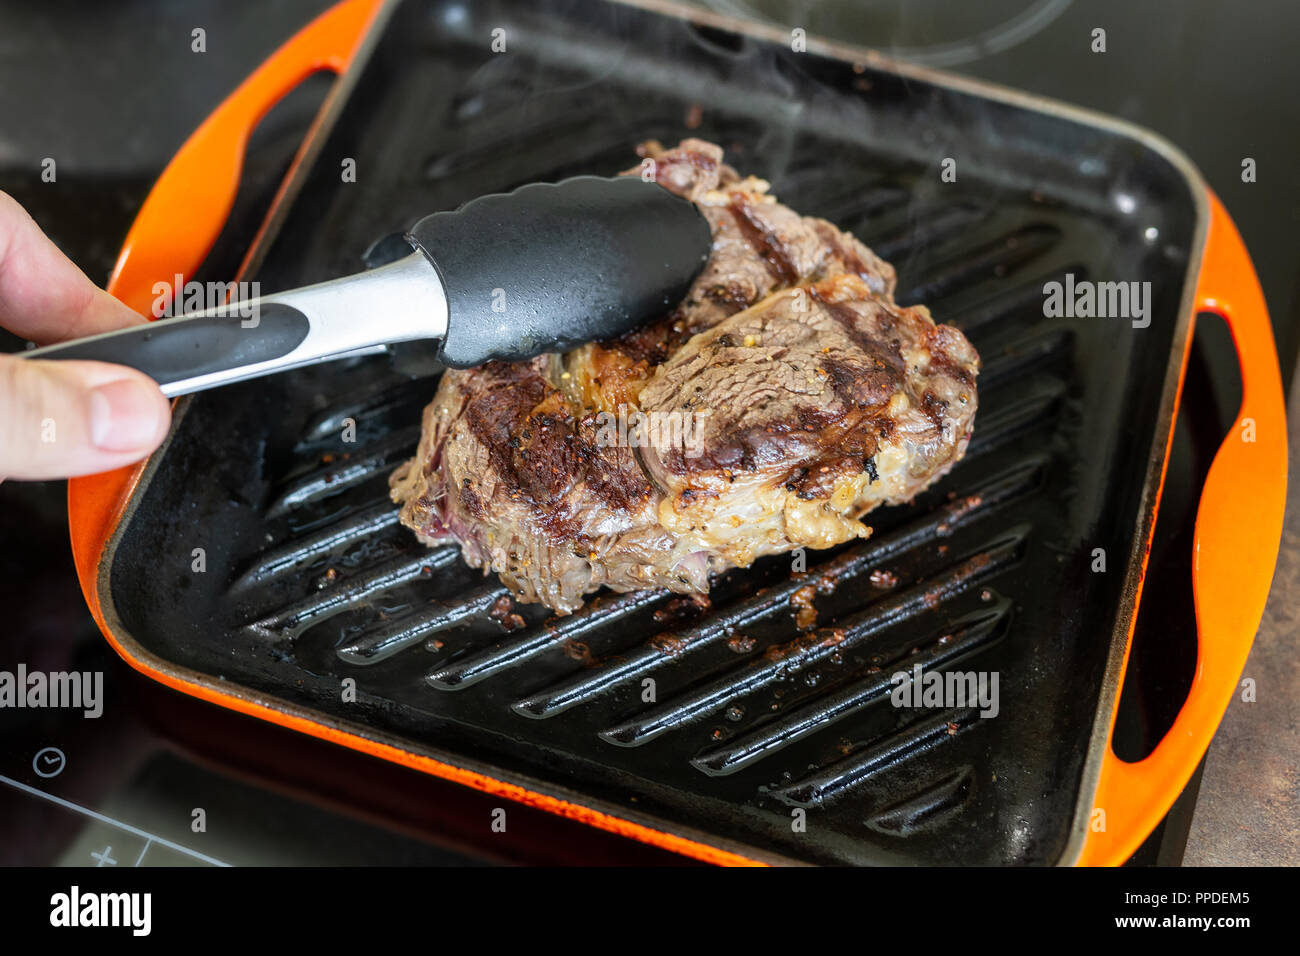 Cooking Meat On Cast Iron Grill Pan Indoors At Home Person Turning Ribeye Steak On Other Side With Tongs Stock Photo Alamy